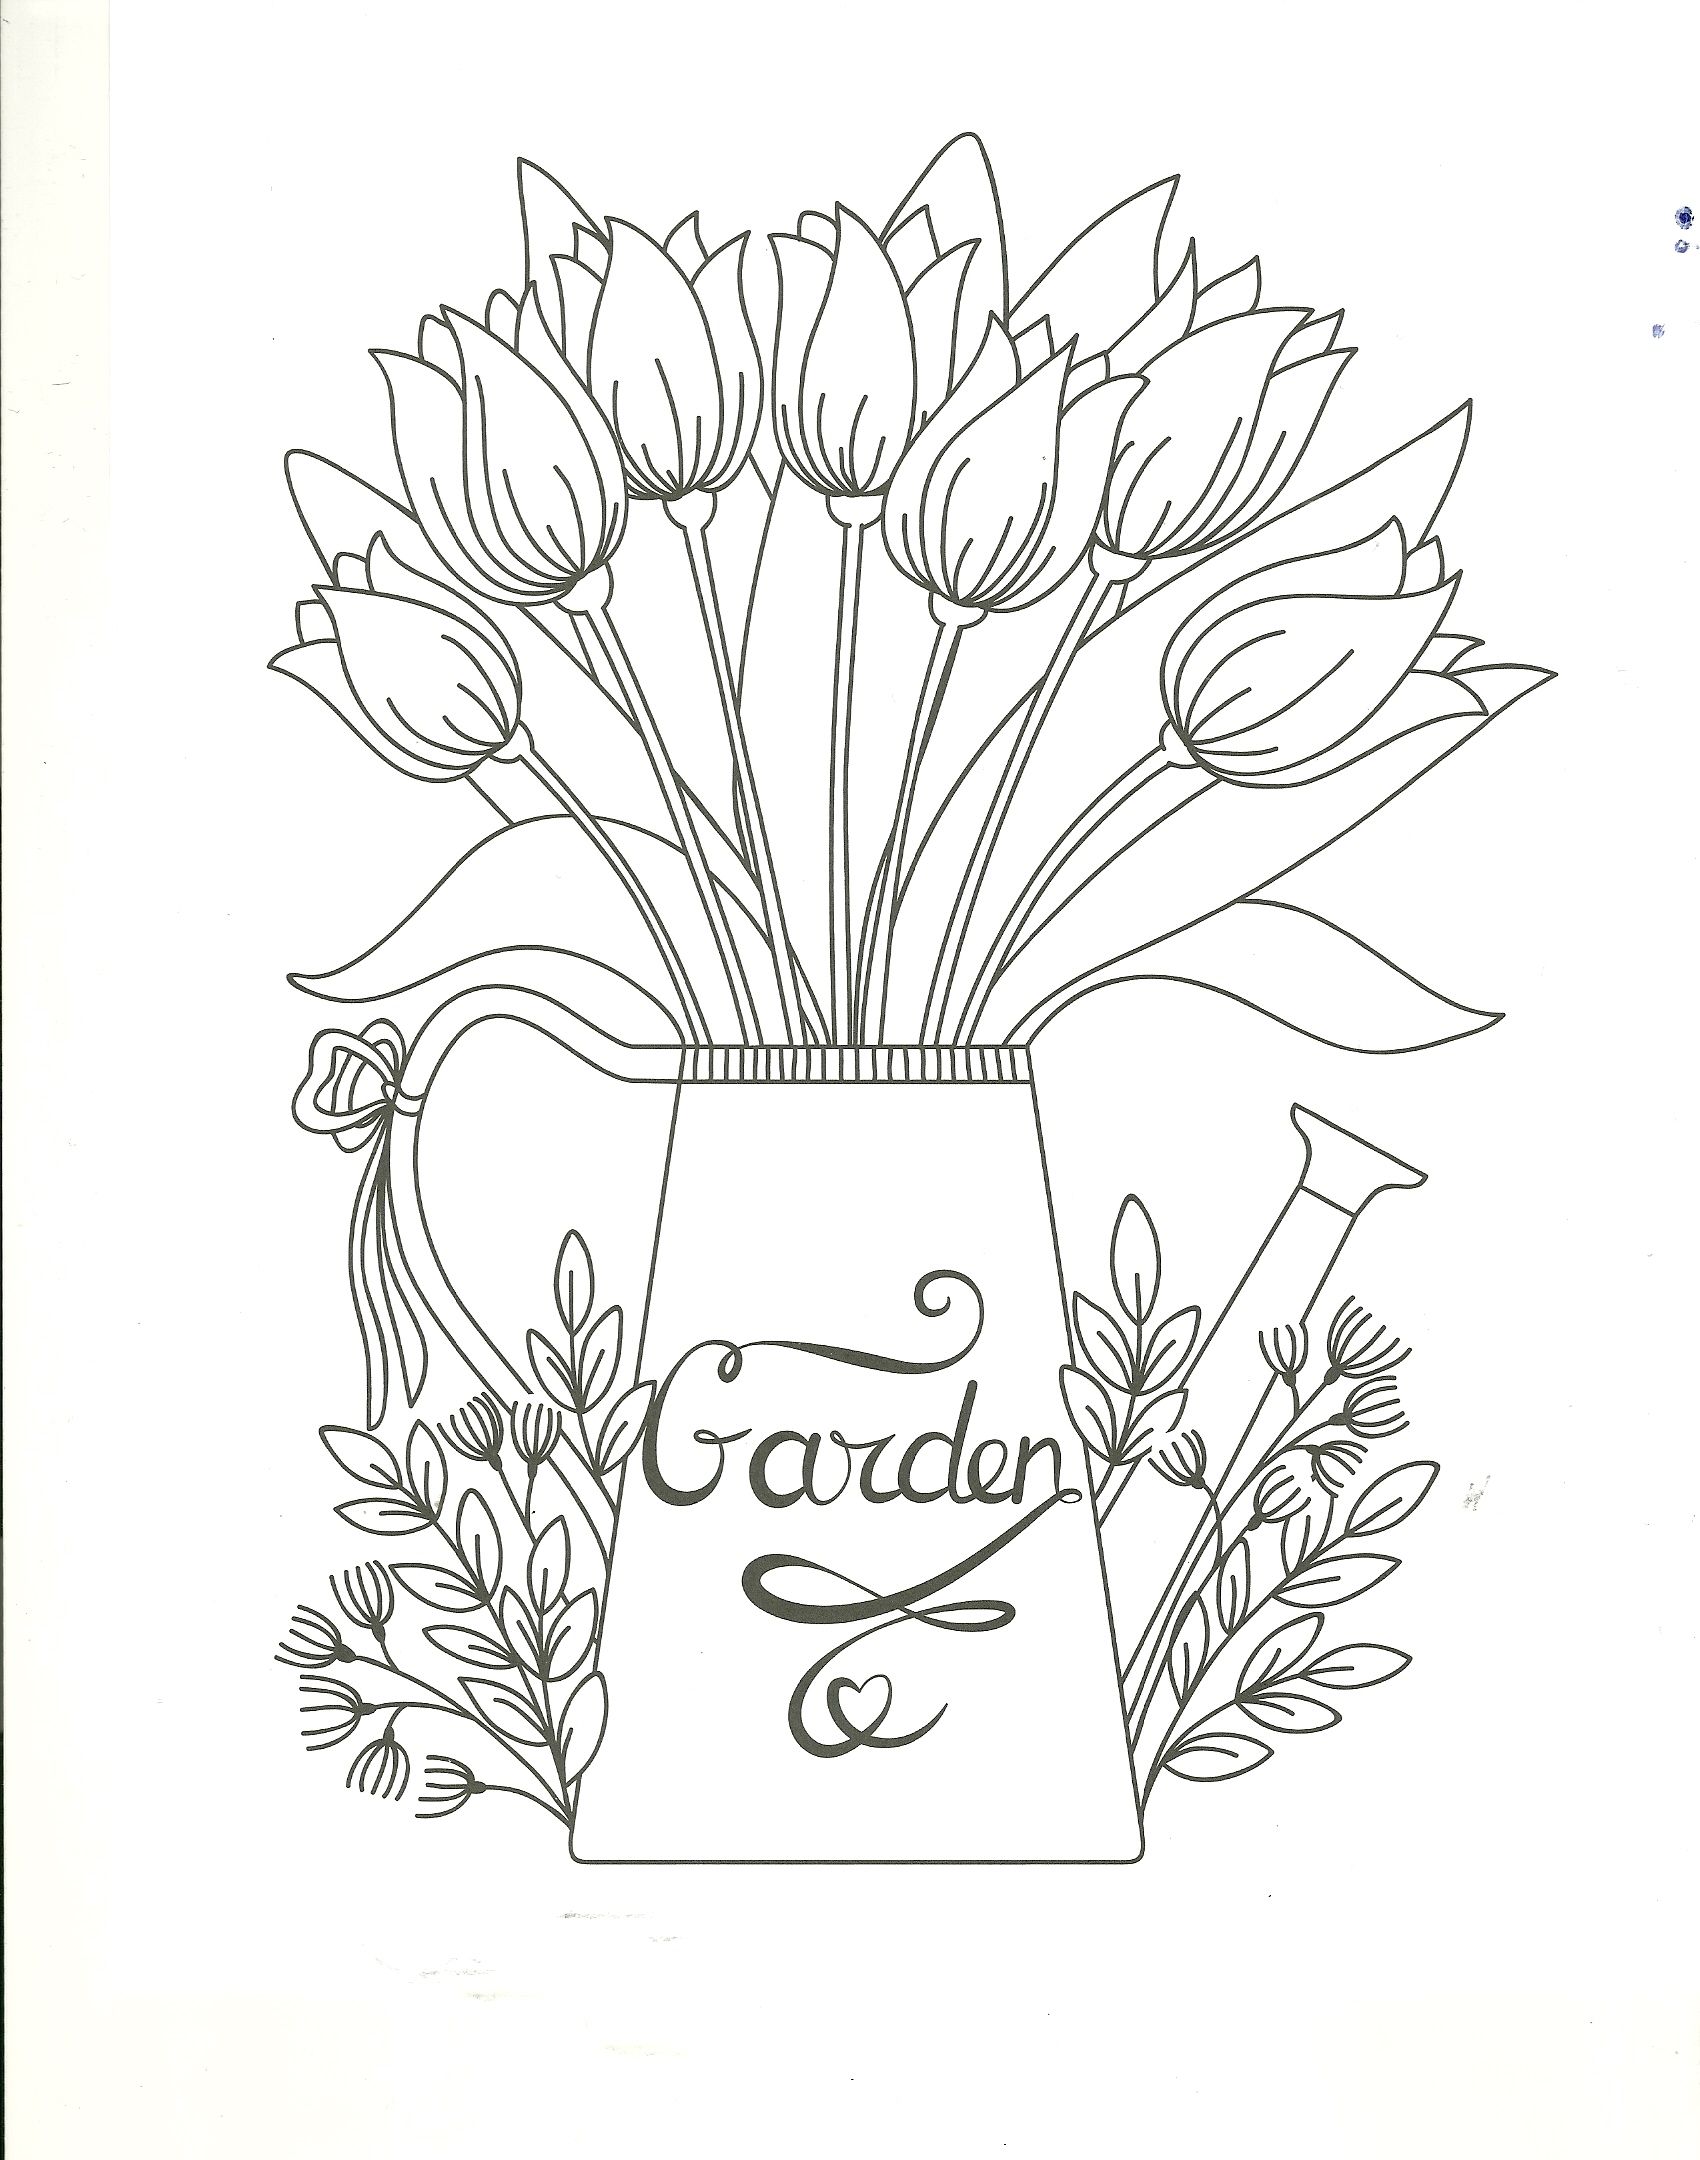 Garden watering can floral coloring page | Cool coloring pages, Coloring  pages, Embroidery patterns